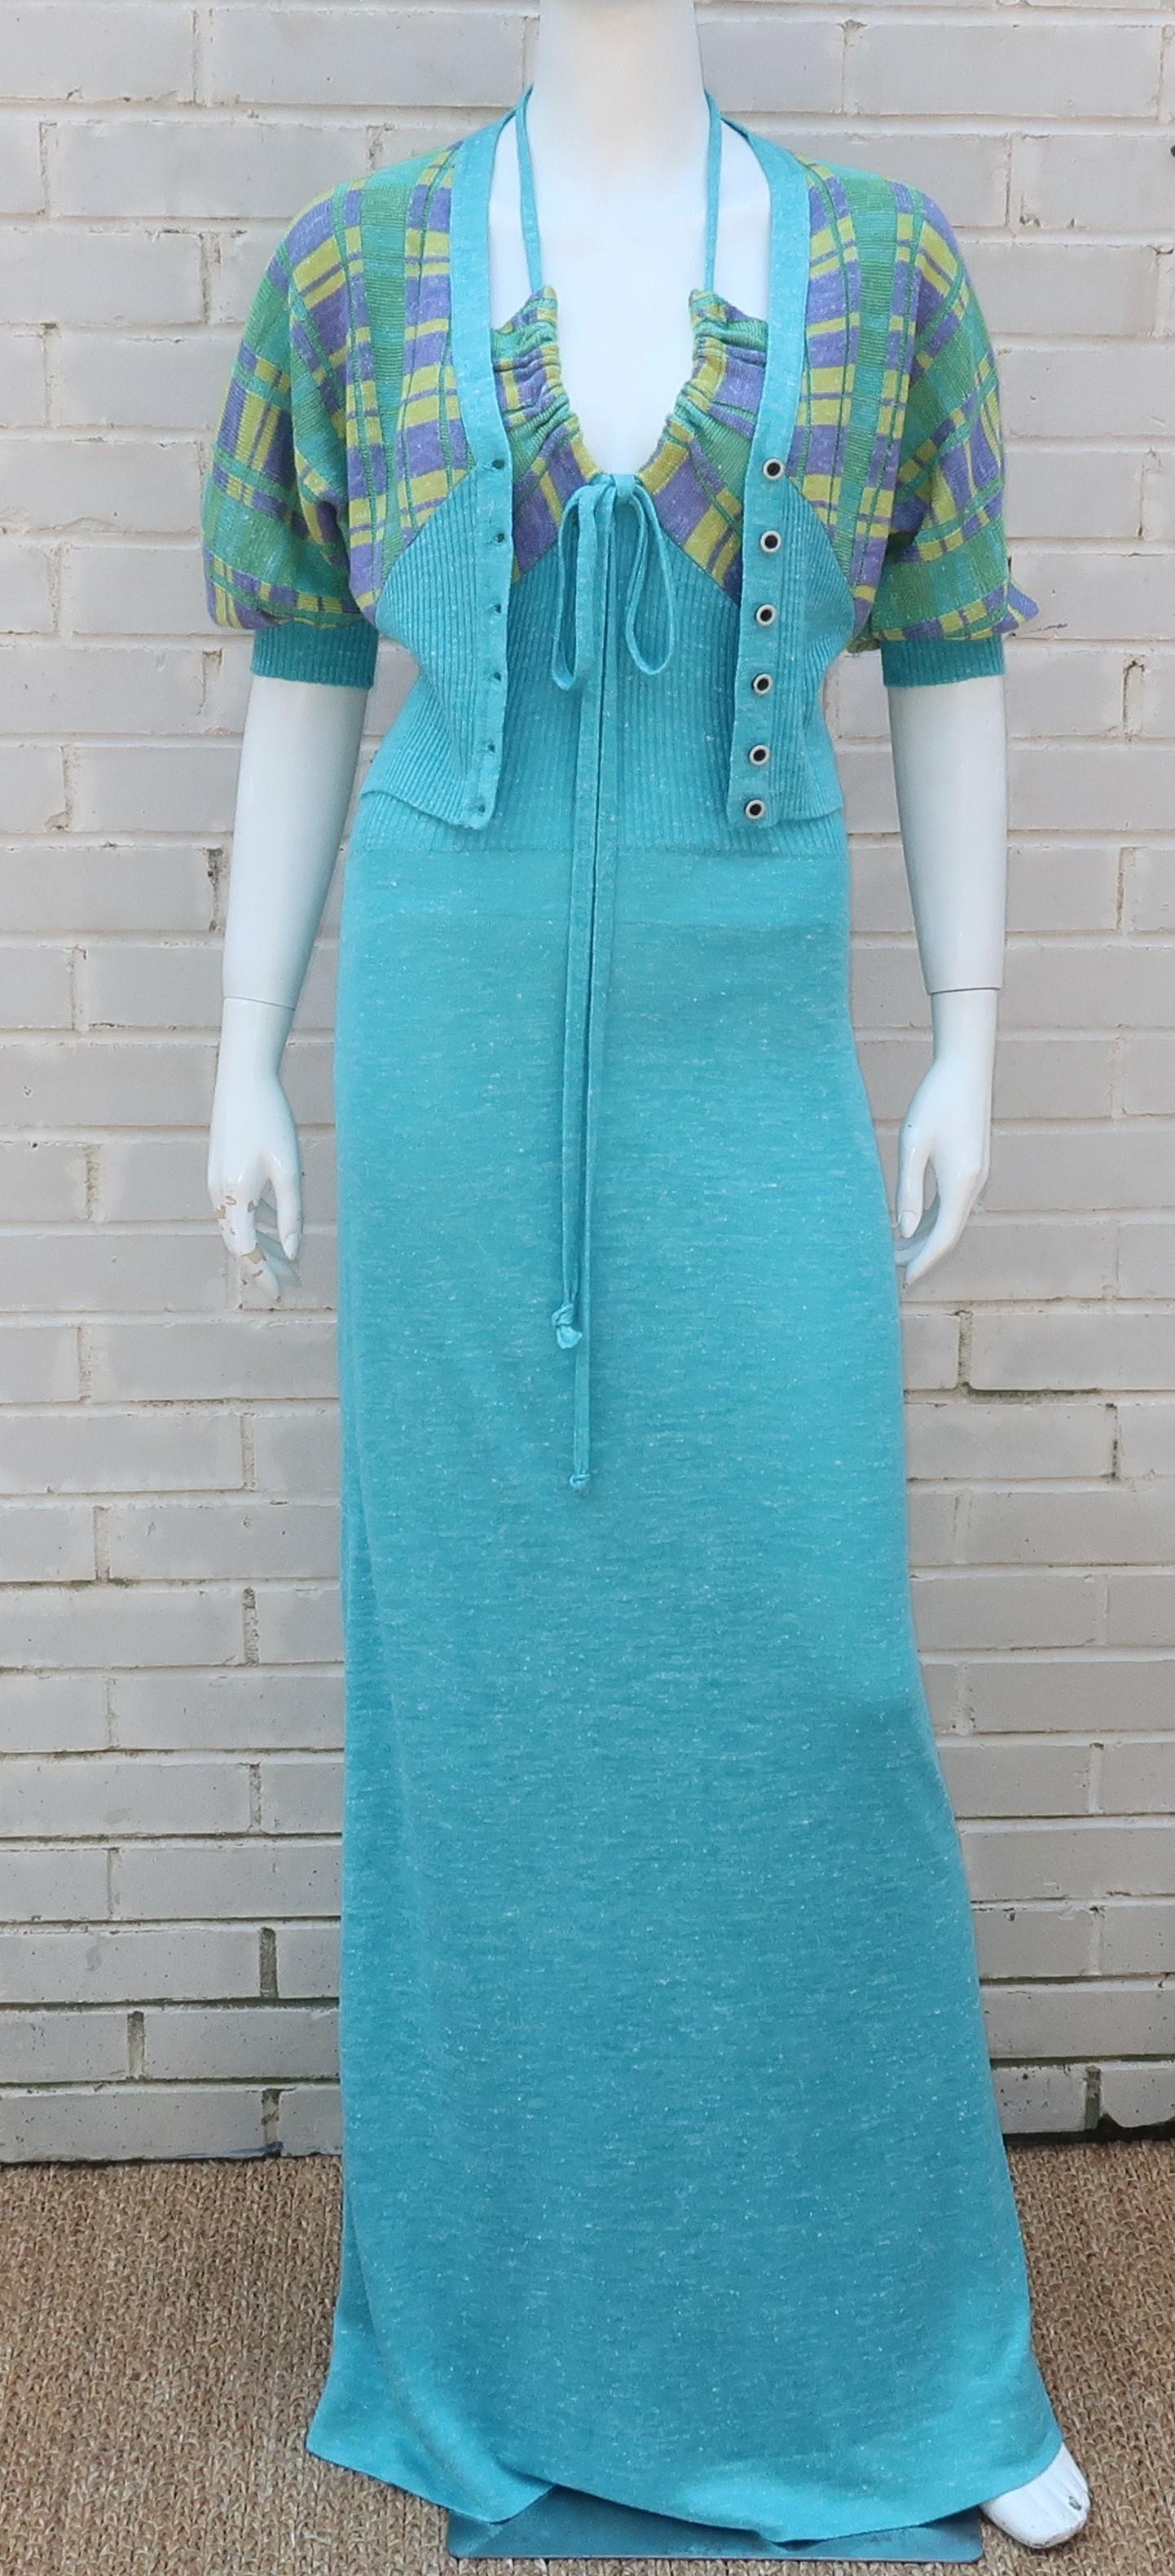 This 1970's Italian knit maxi dress by ORA has a dual personality ... demure with the coordinating sweater jacket and completely sassy without!  The dress has a pullover halter construction with a tie and ribbed section at the bust.  The cropped